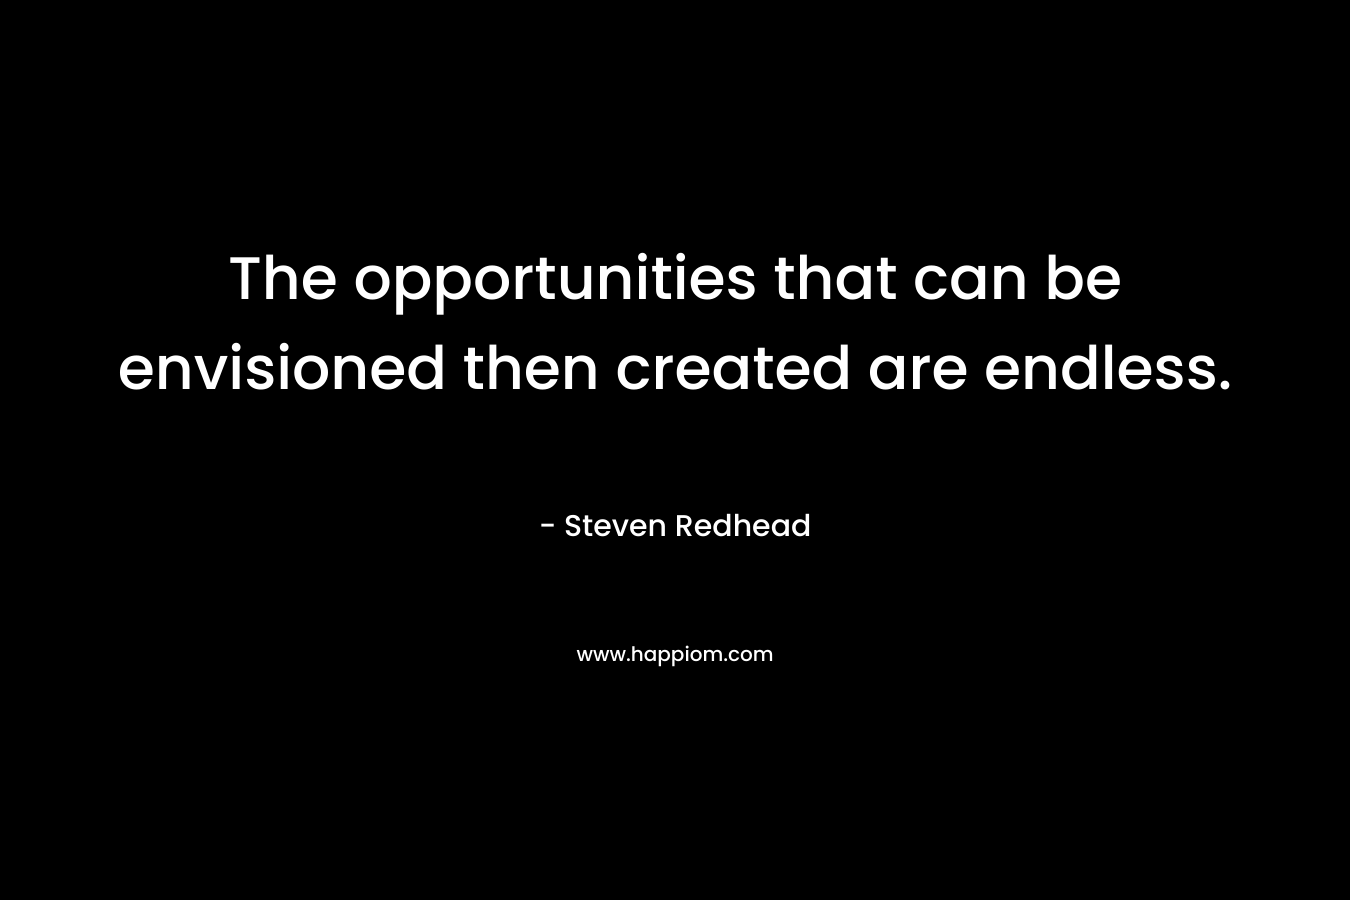 The opportunities that can be envisioned then created are endless.